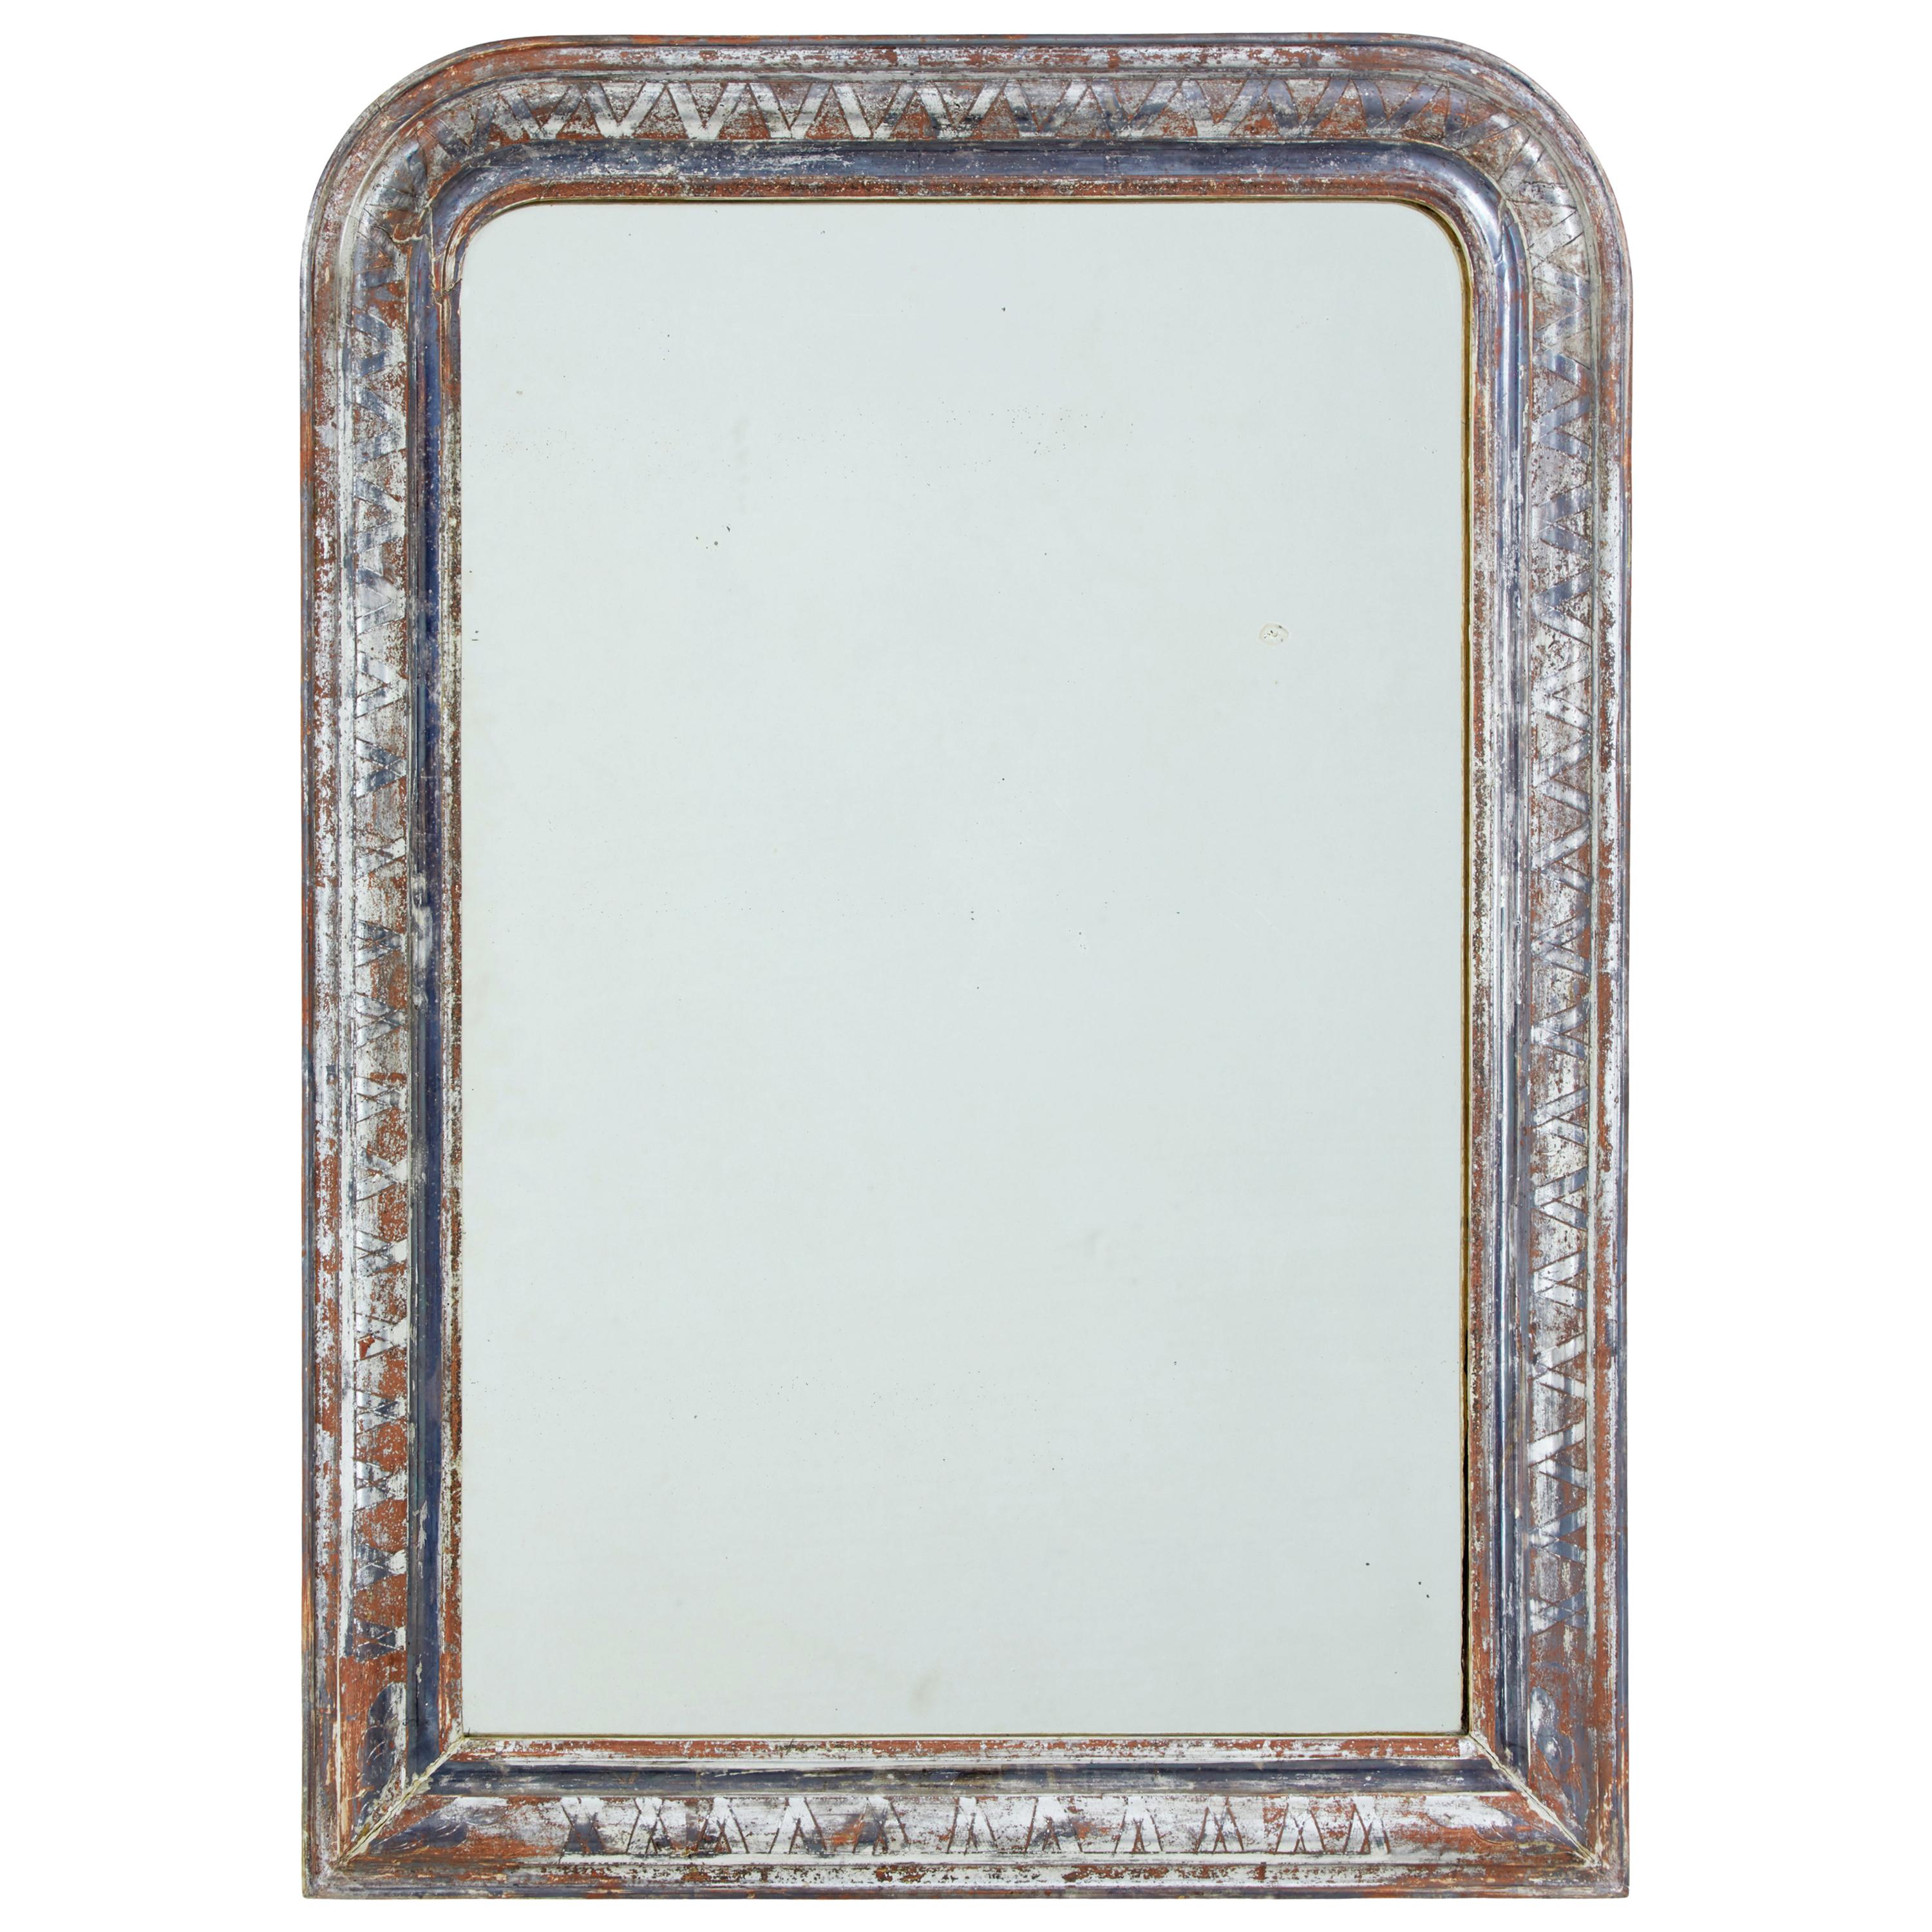 1920s Silver Gilt Patterned Wall Mirror